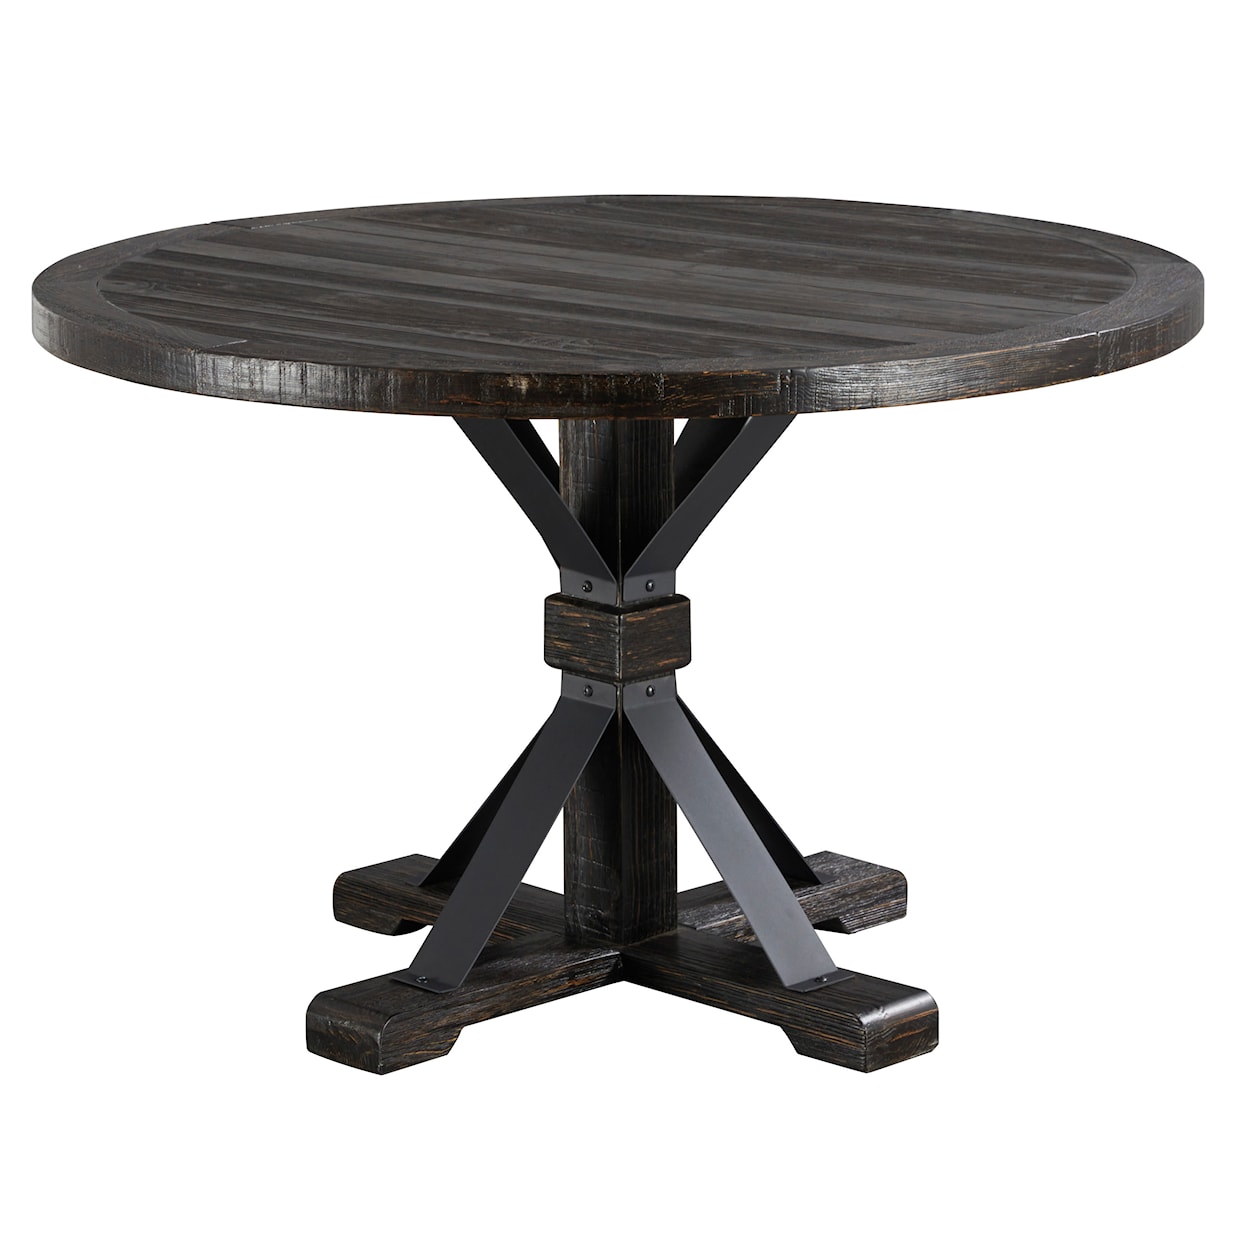 Signature Design by Ashley Broshound Dining Table